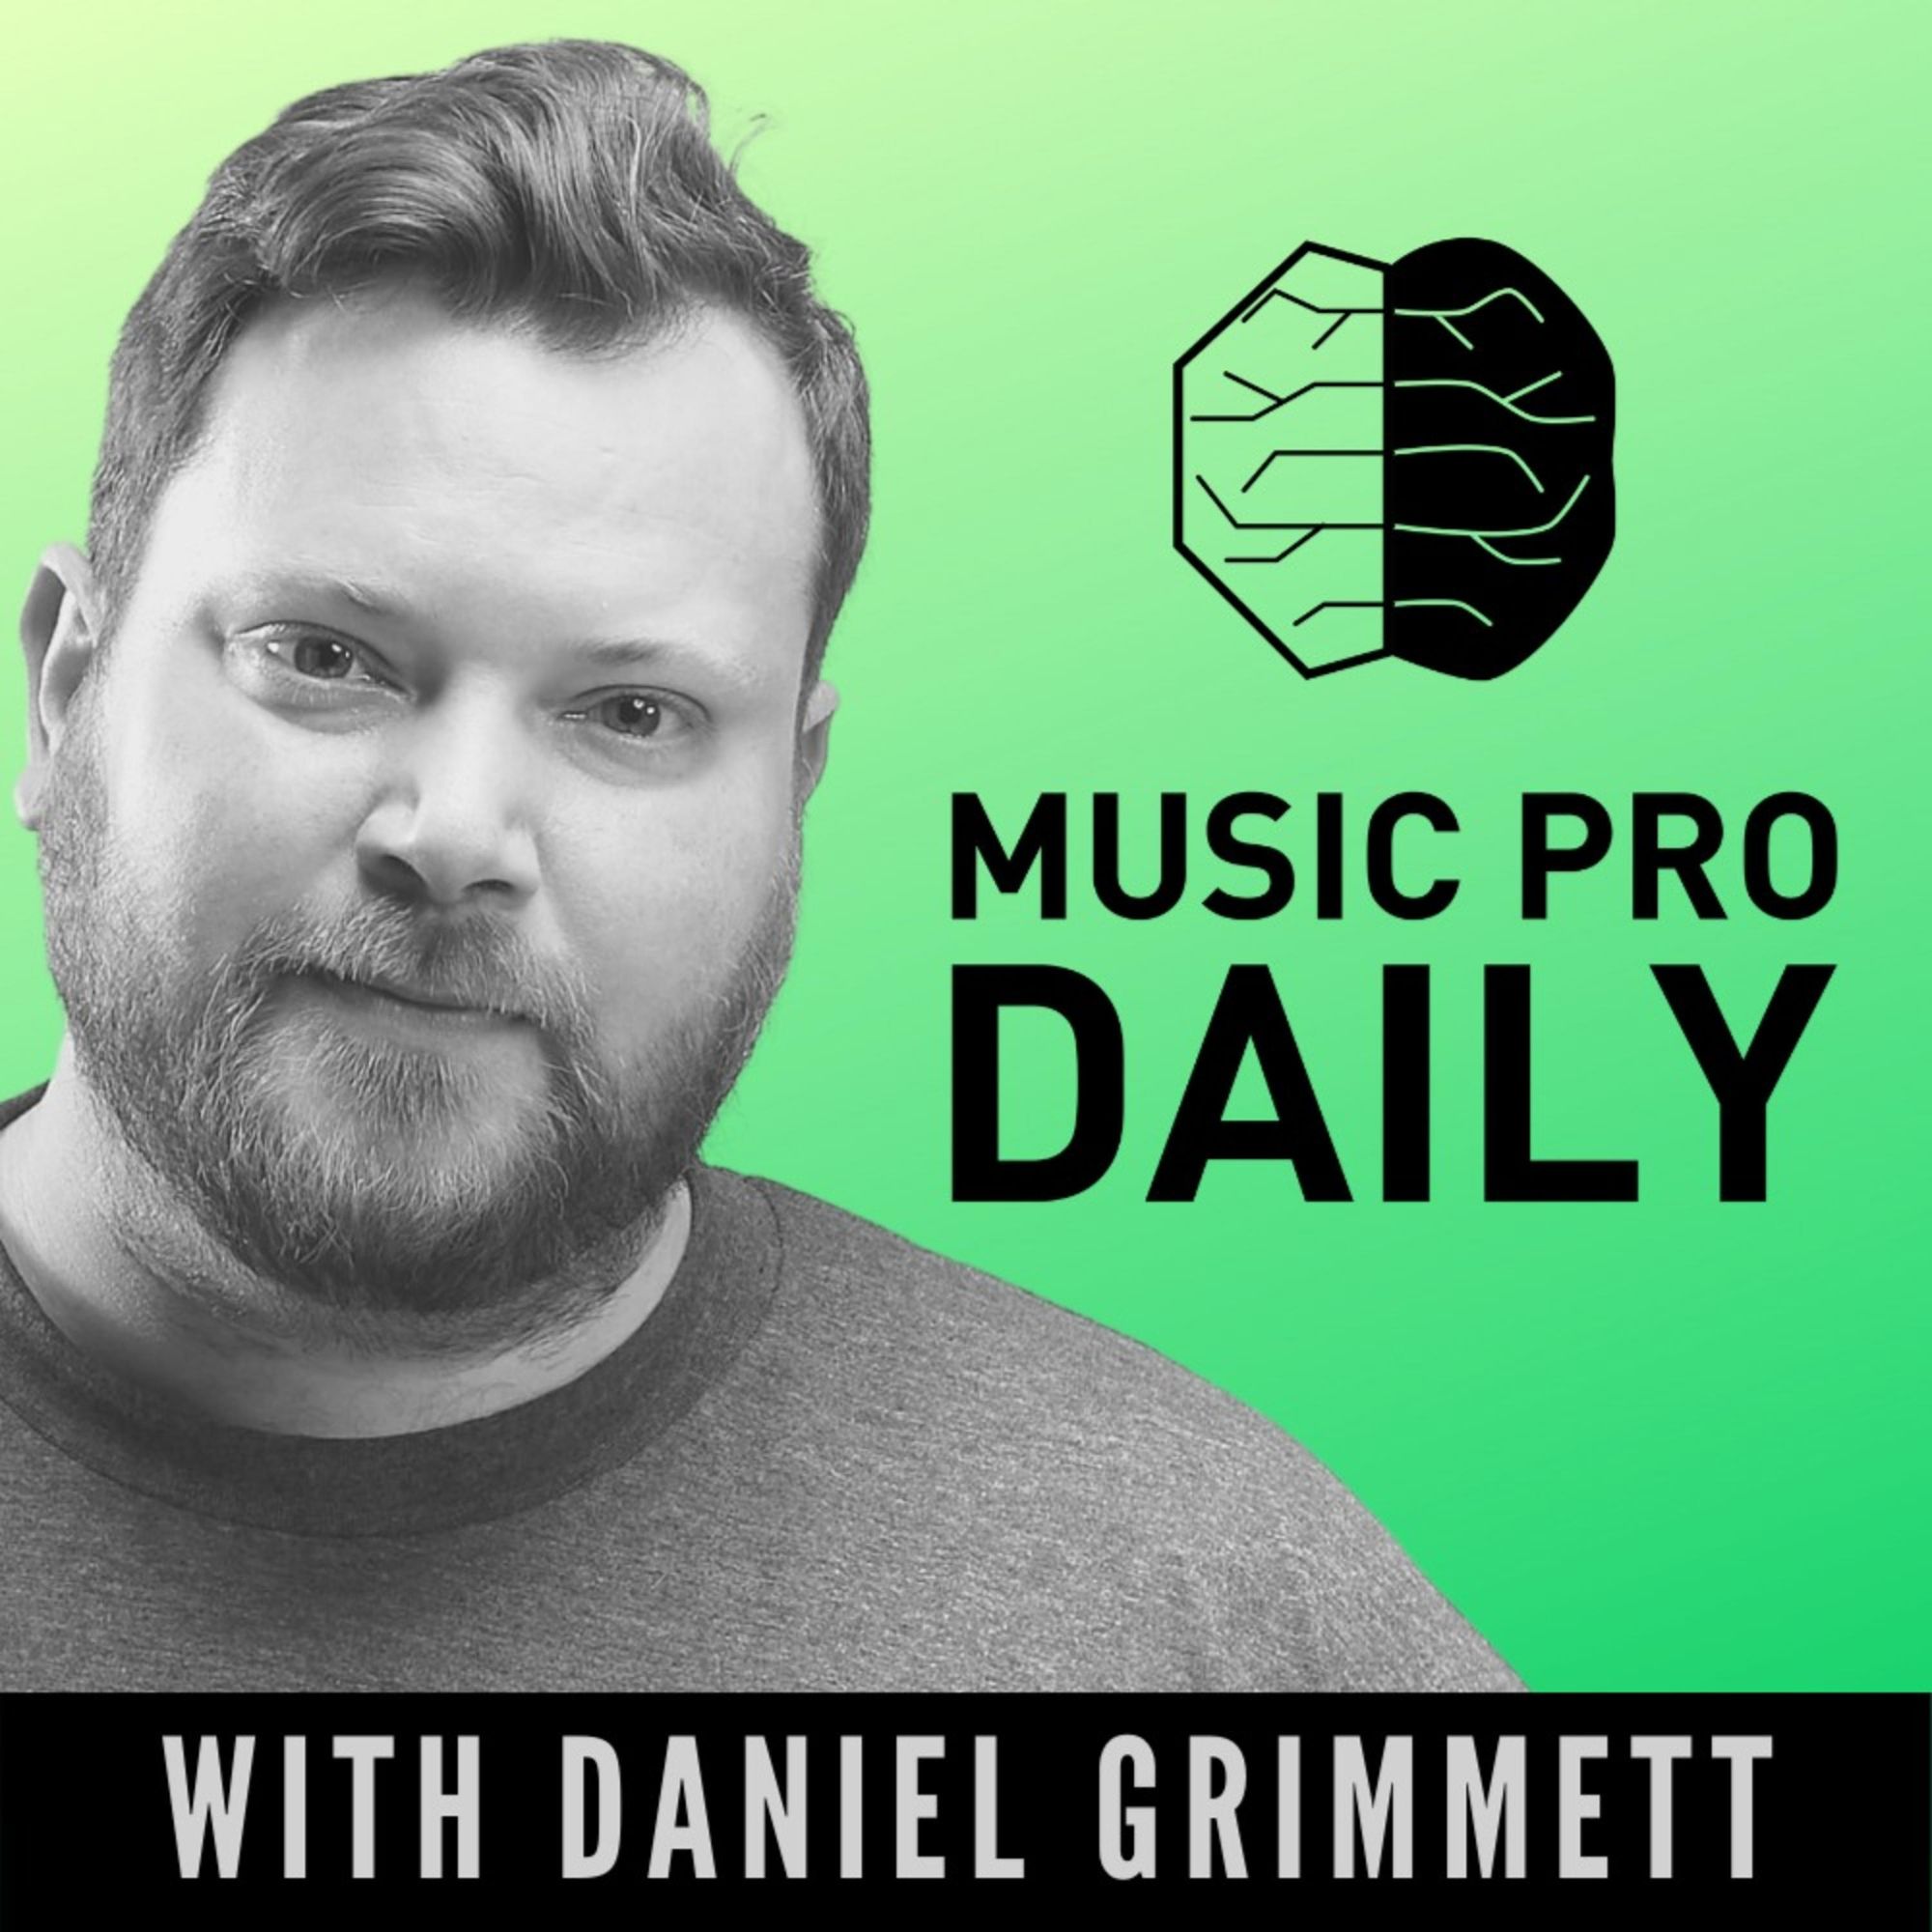 Music Pro Daily with Daniel Grimmet